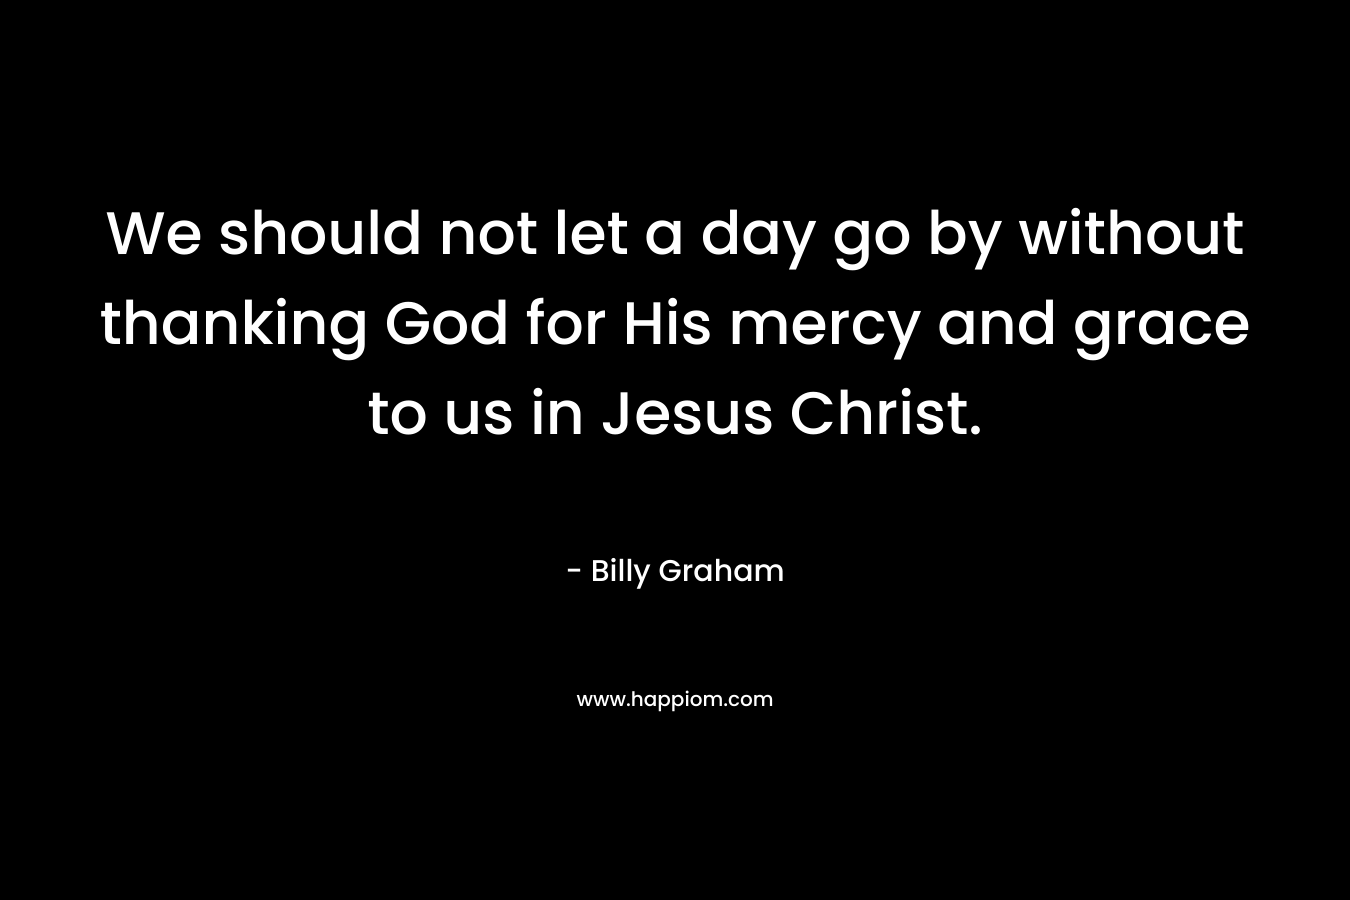 We should not let a day go by without thanking God for His mercy and grace to us in Jesus Christ. – Billy Graham